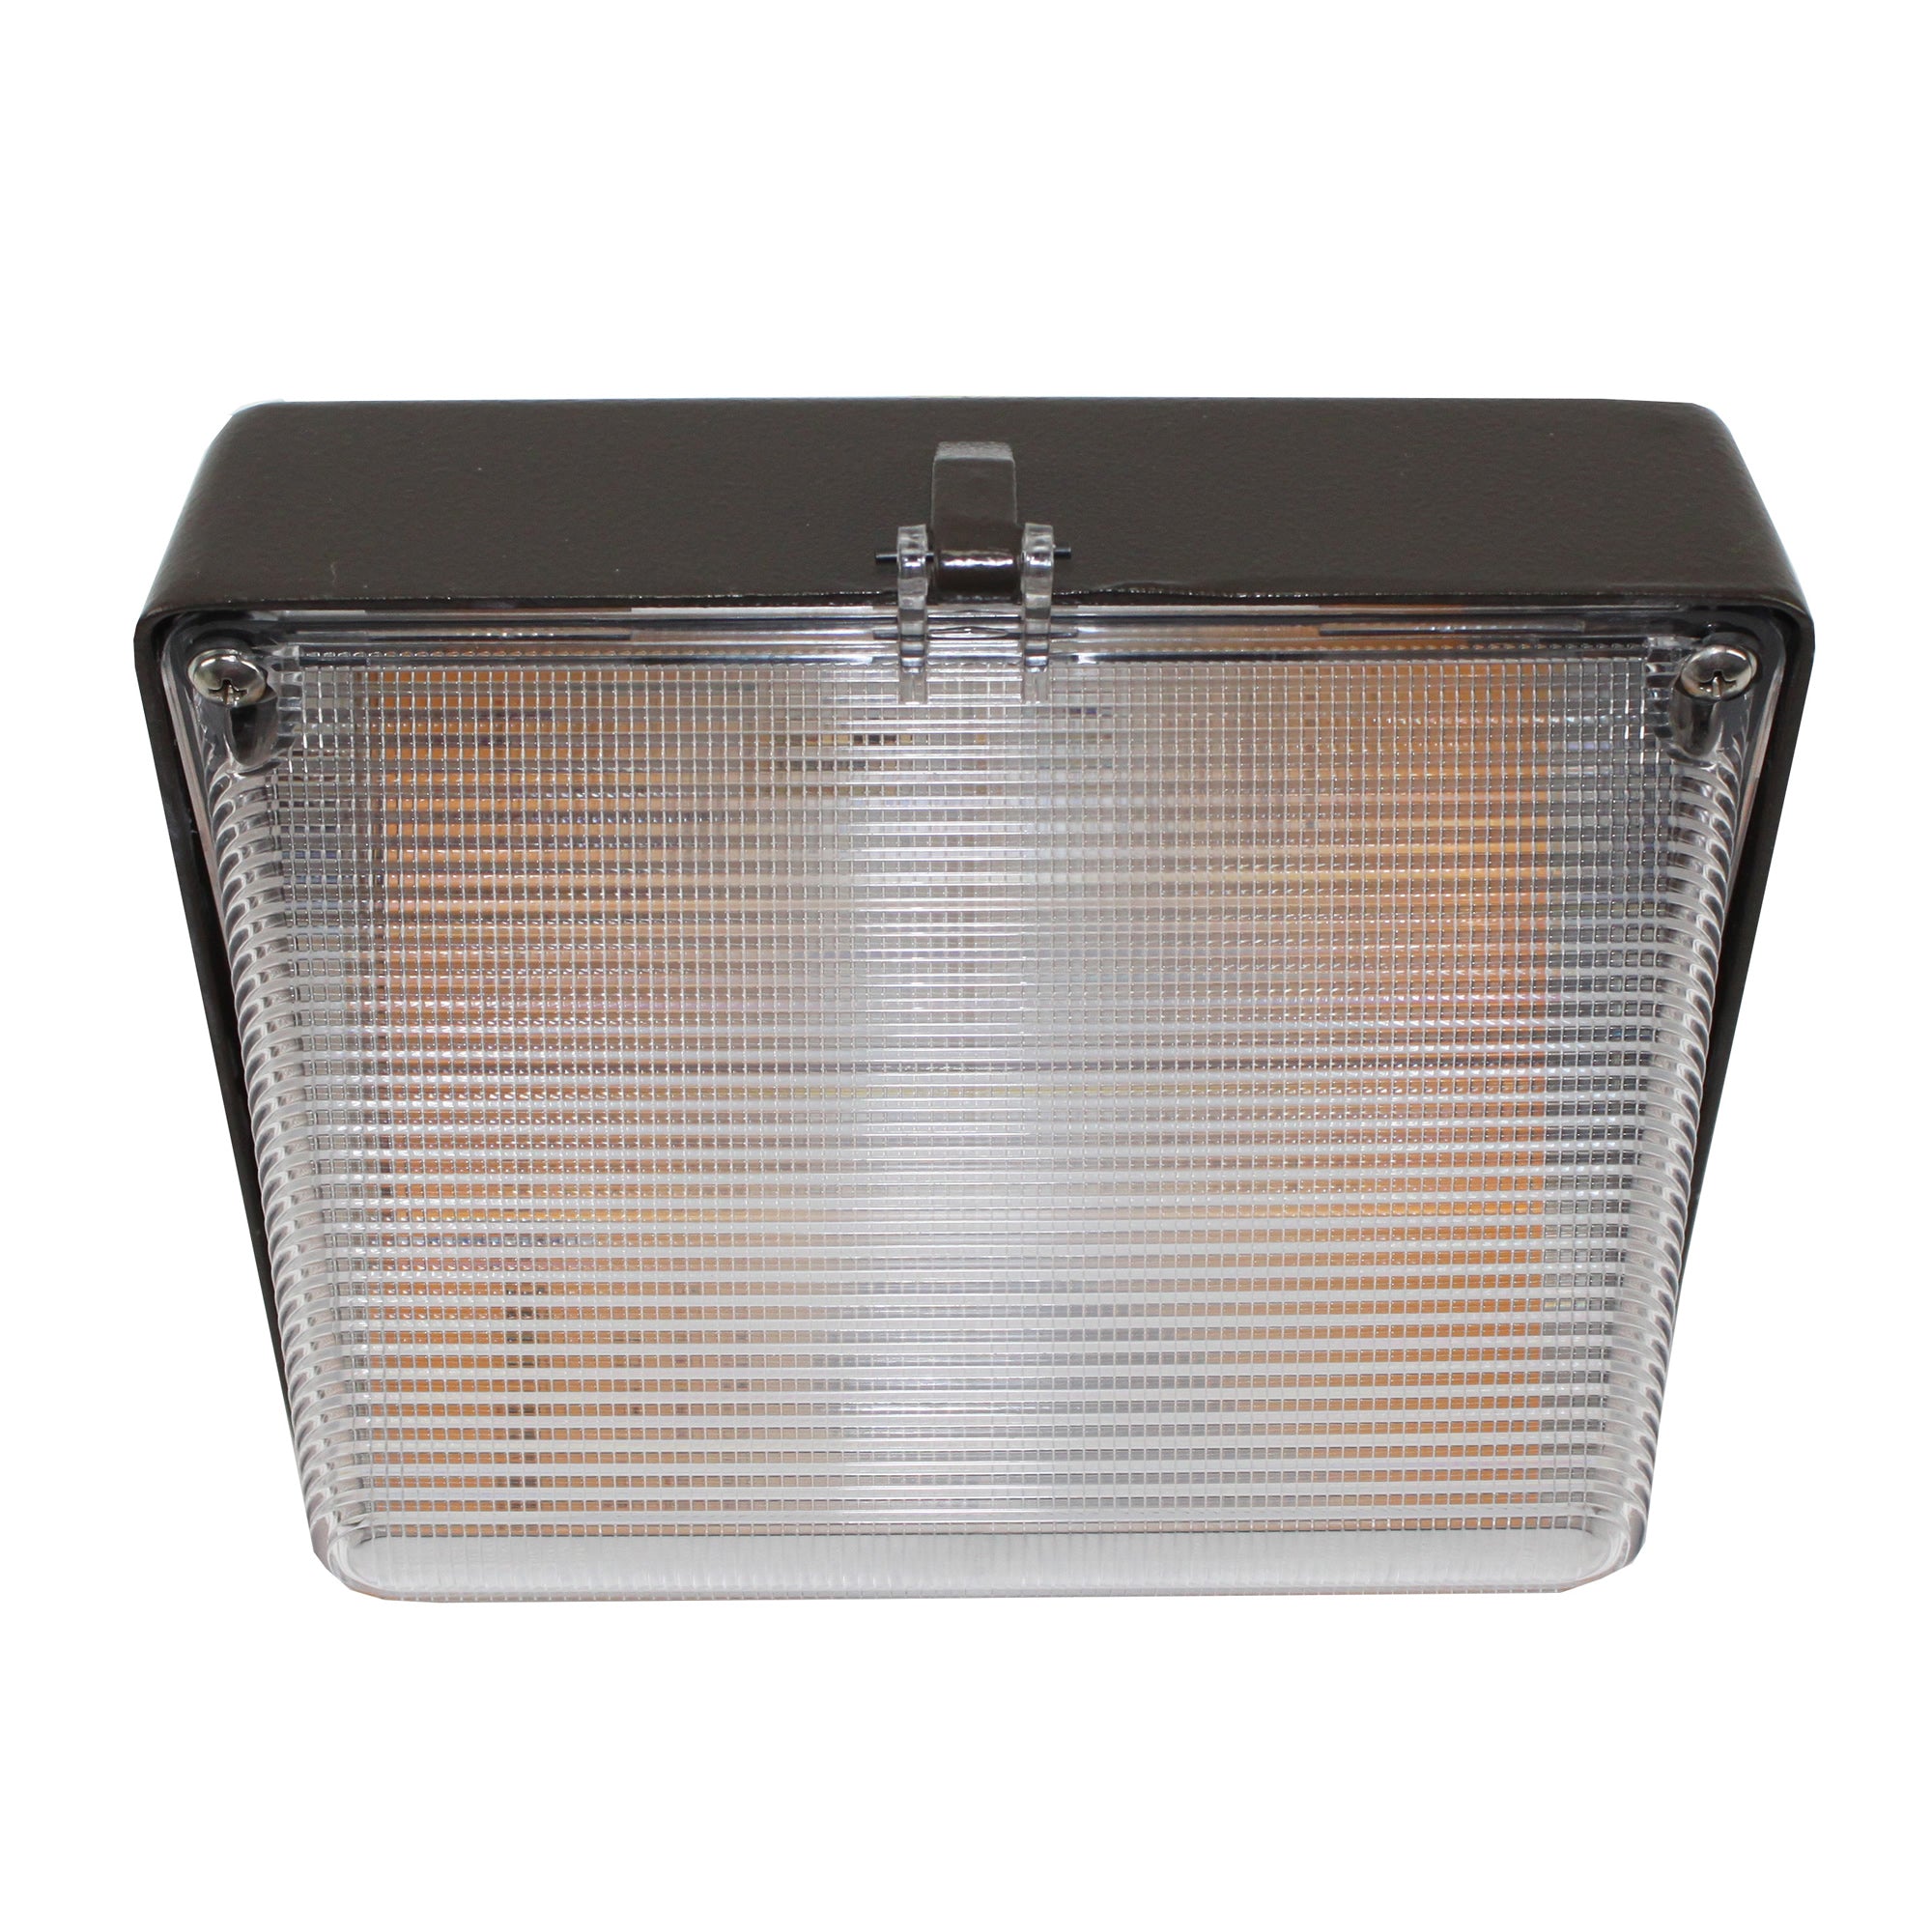 Day-Brite, DAY-BRITE SMALL WALL PACK NWL100S12 100W 120V LIGHT FIXTURE